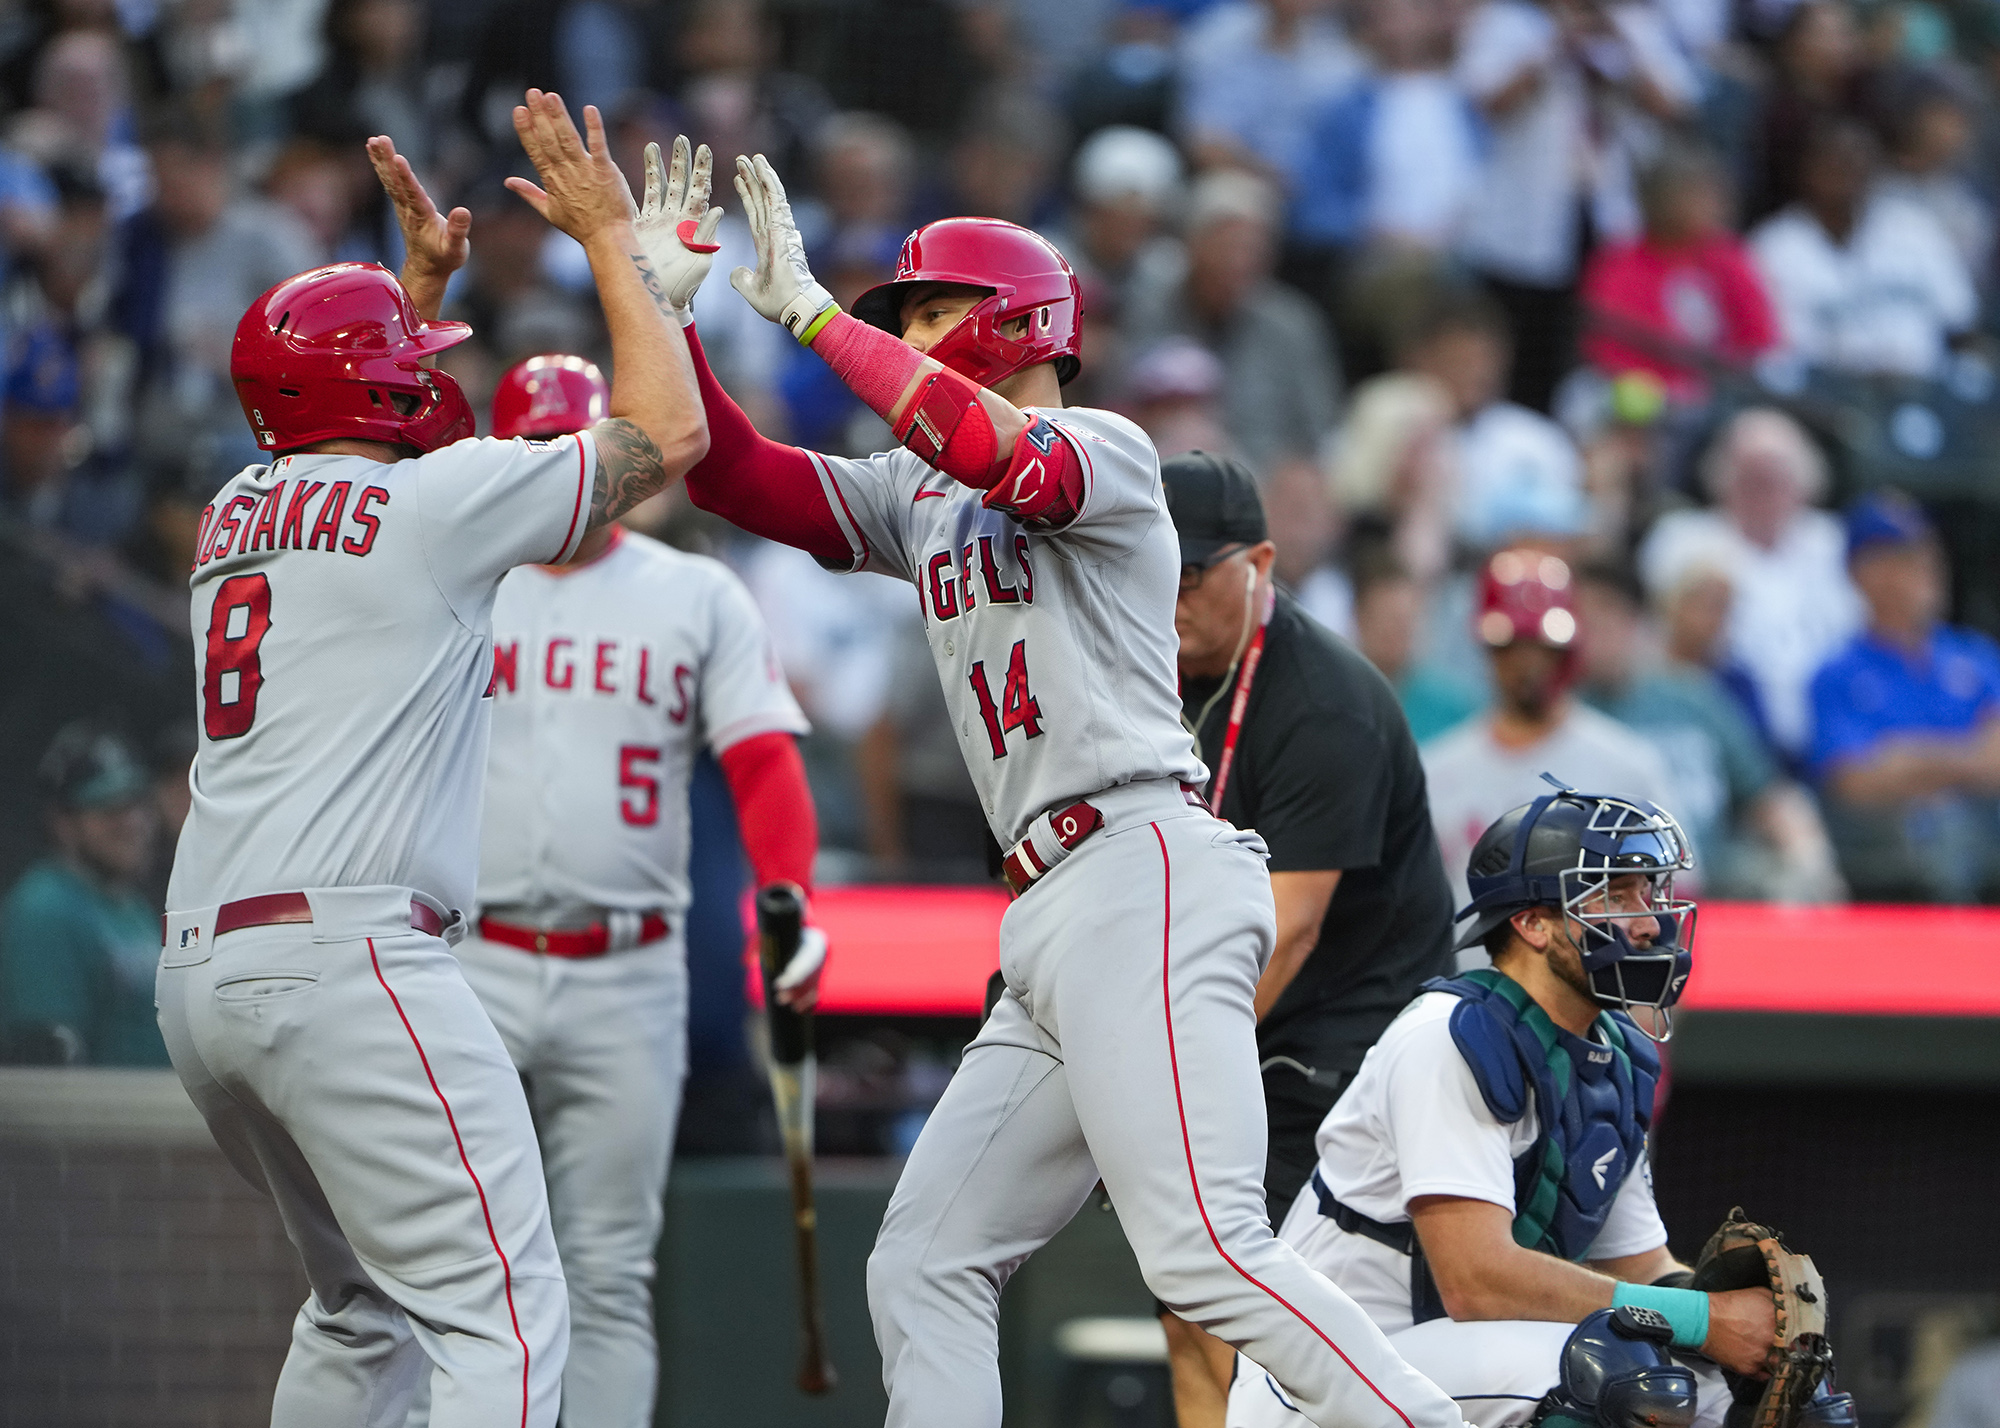 Late-inning heroics can't get Mariners past Angels as they fall 8-5 in 11  innings - The Columbian